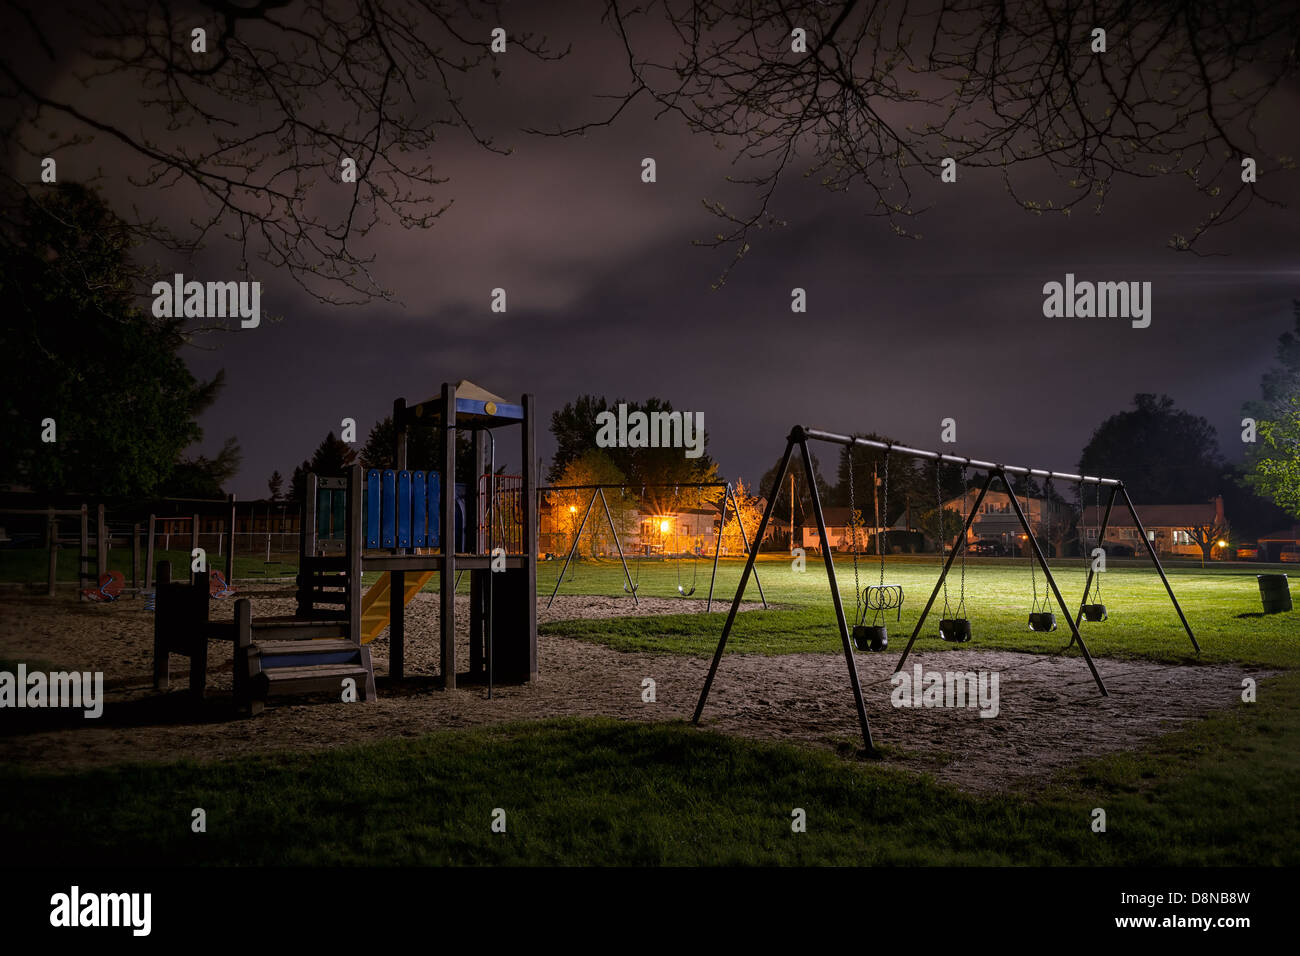 A creepy scene of a deserted children's playground in a suburban park at night time. Stock Photo